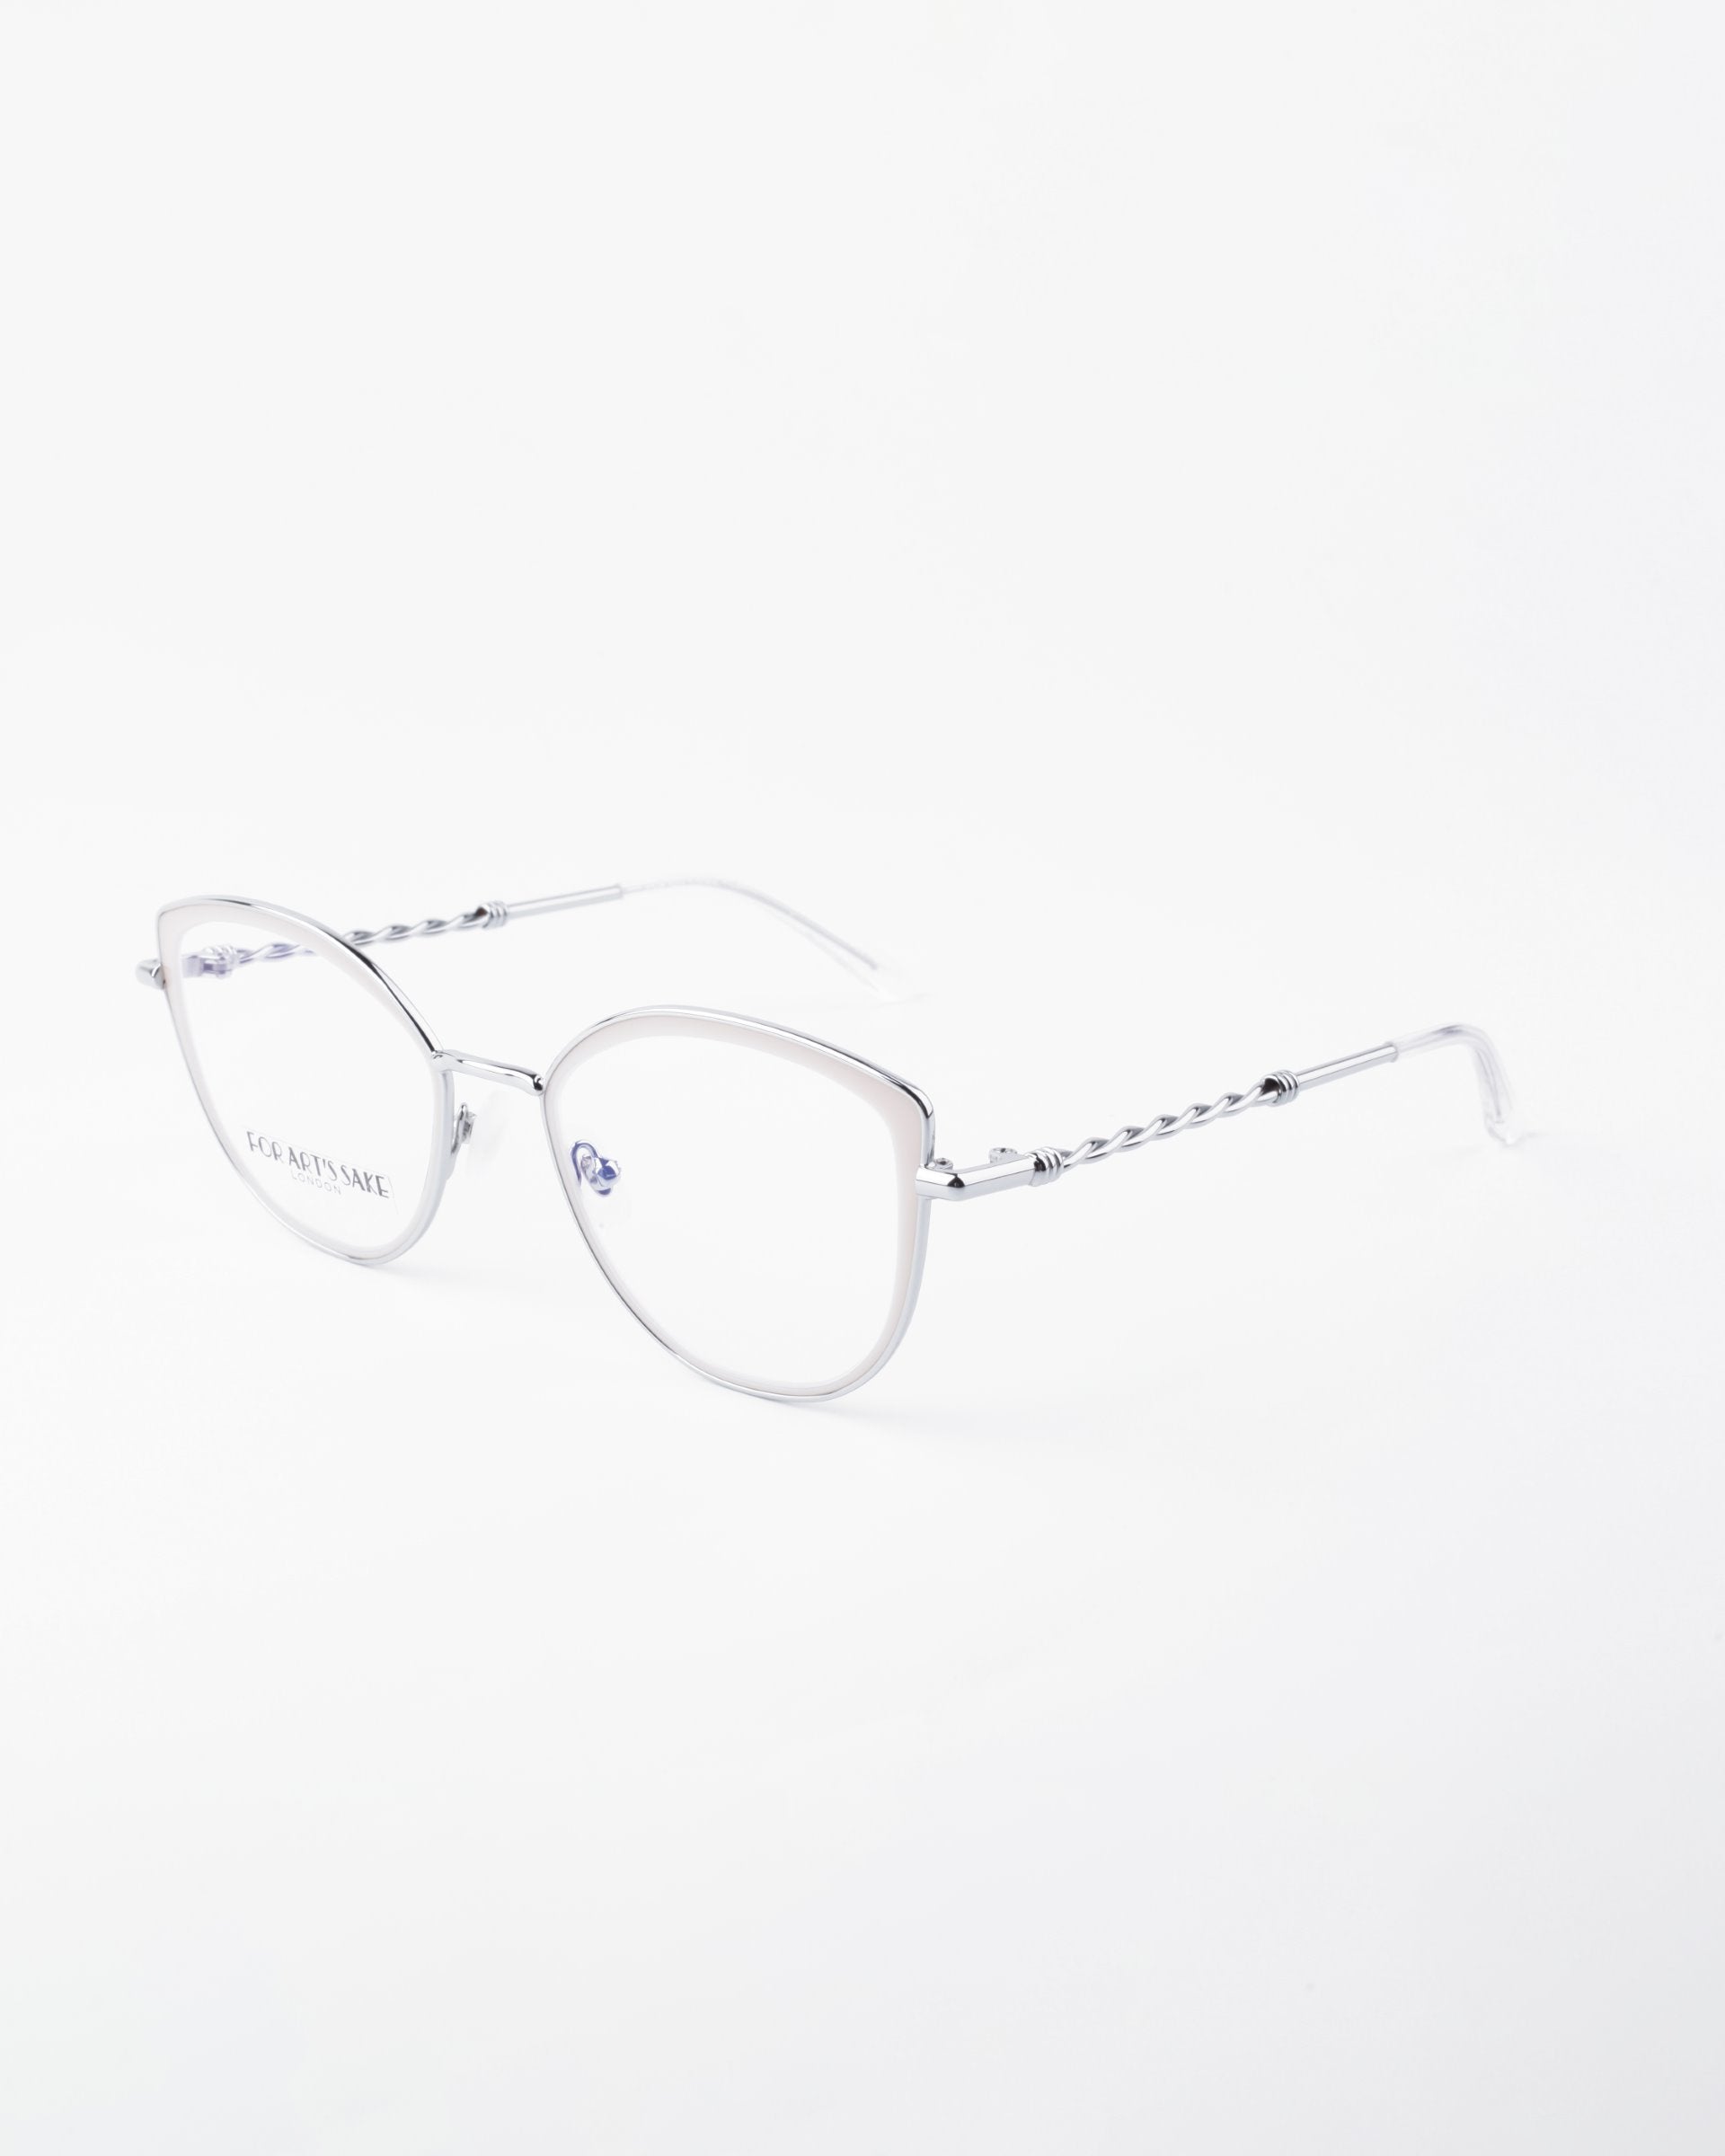 Clear, rectangular eyeglasses with metallic, thin, twisted arms. The lenses have a subtle tint and include a Blue Light Filter. The frame is adorned with small detailing near the hinges and 18-karat gold-plated accents. The temple tips are smooth and straight, set against a plain white background. These are the Julie by For Art&#39;s Sake®.